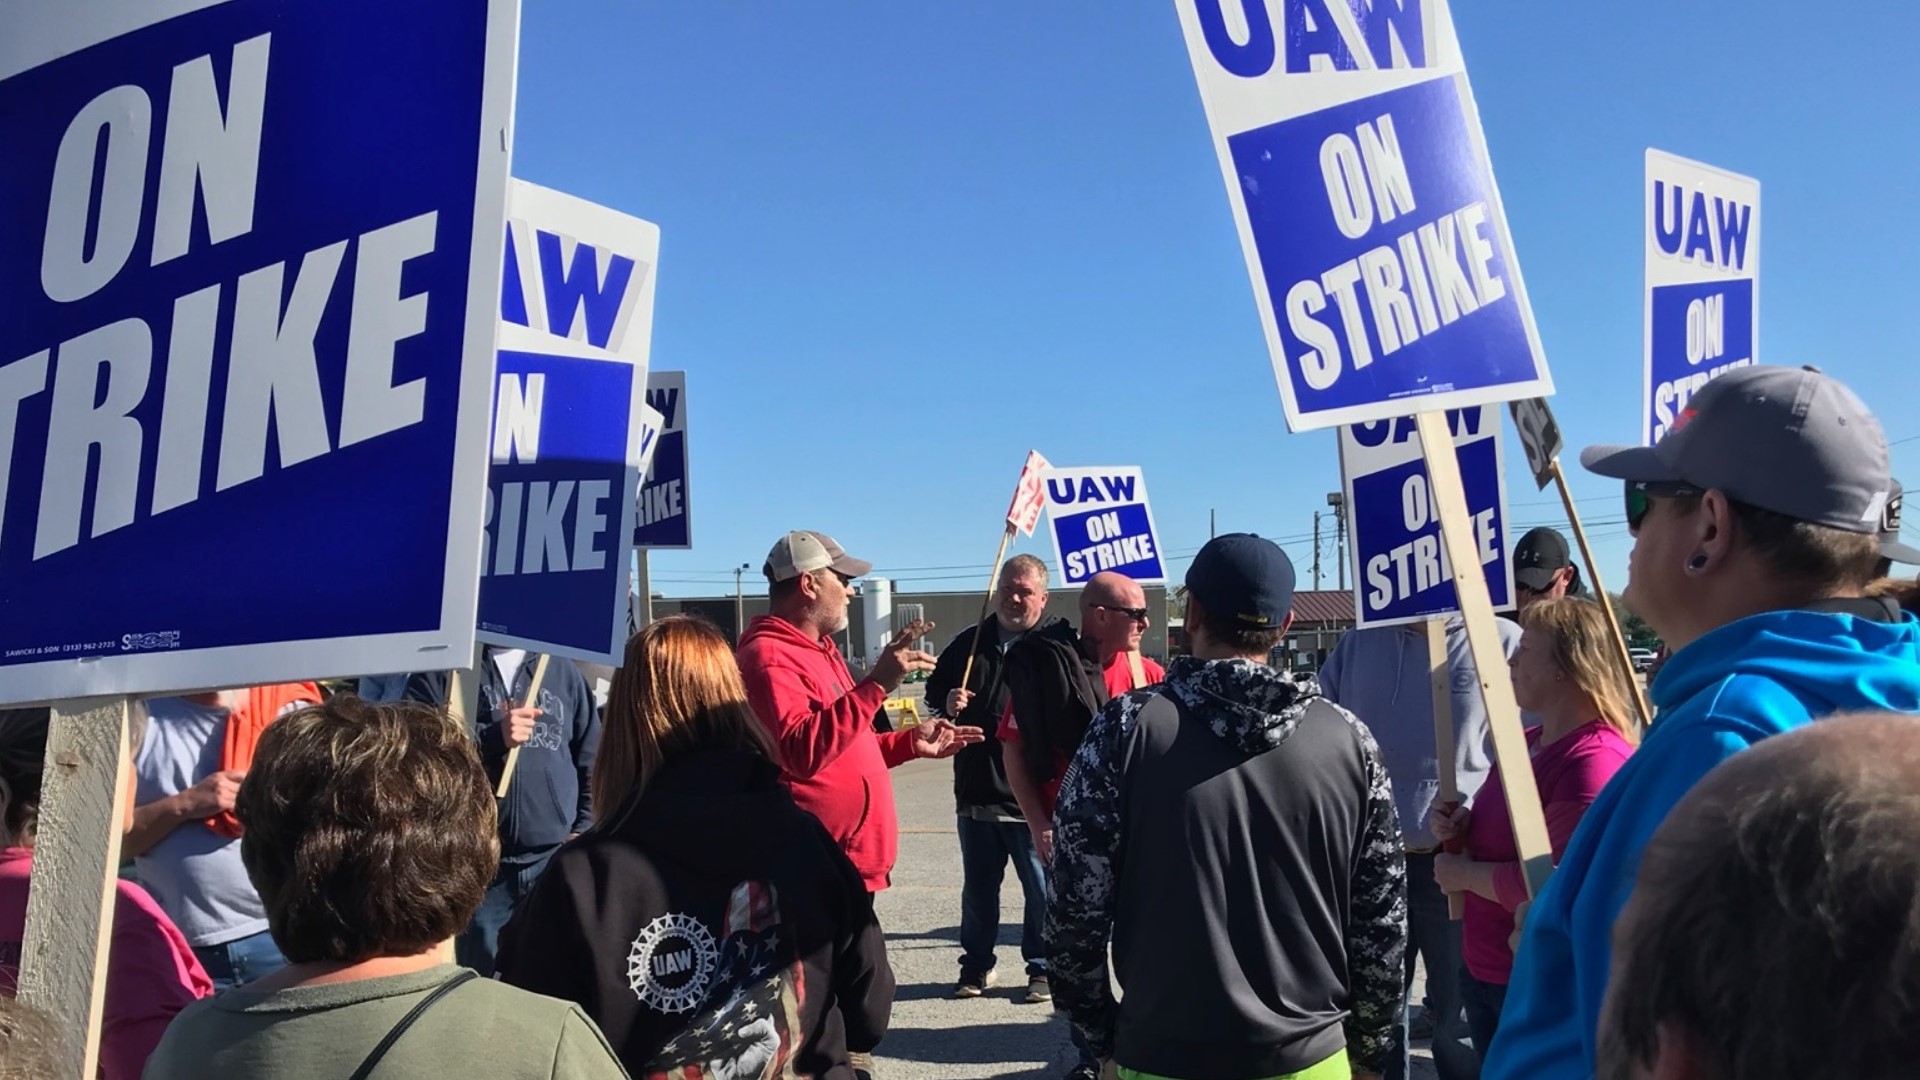 Workers set up picket lines in Ankeny, Ottumwa and at several other locations, including the company's headquarters in Moline, Ill., early Thursday morning.